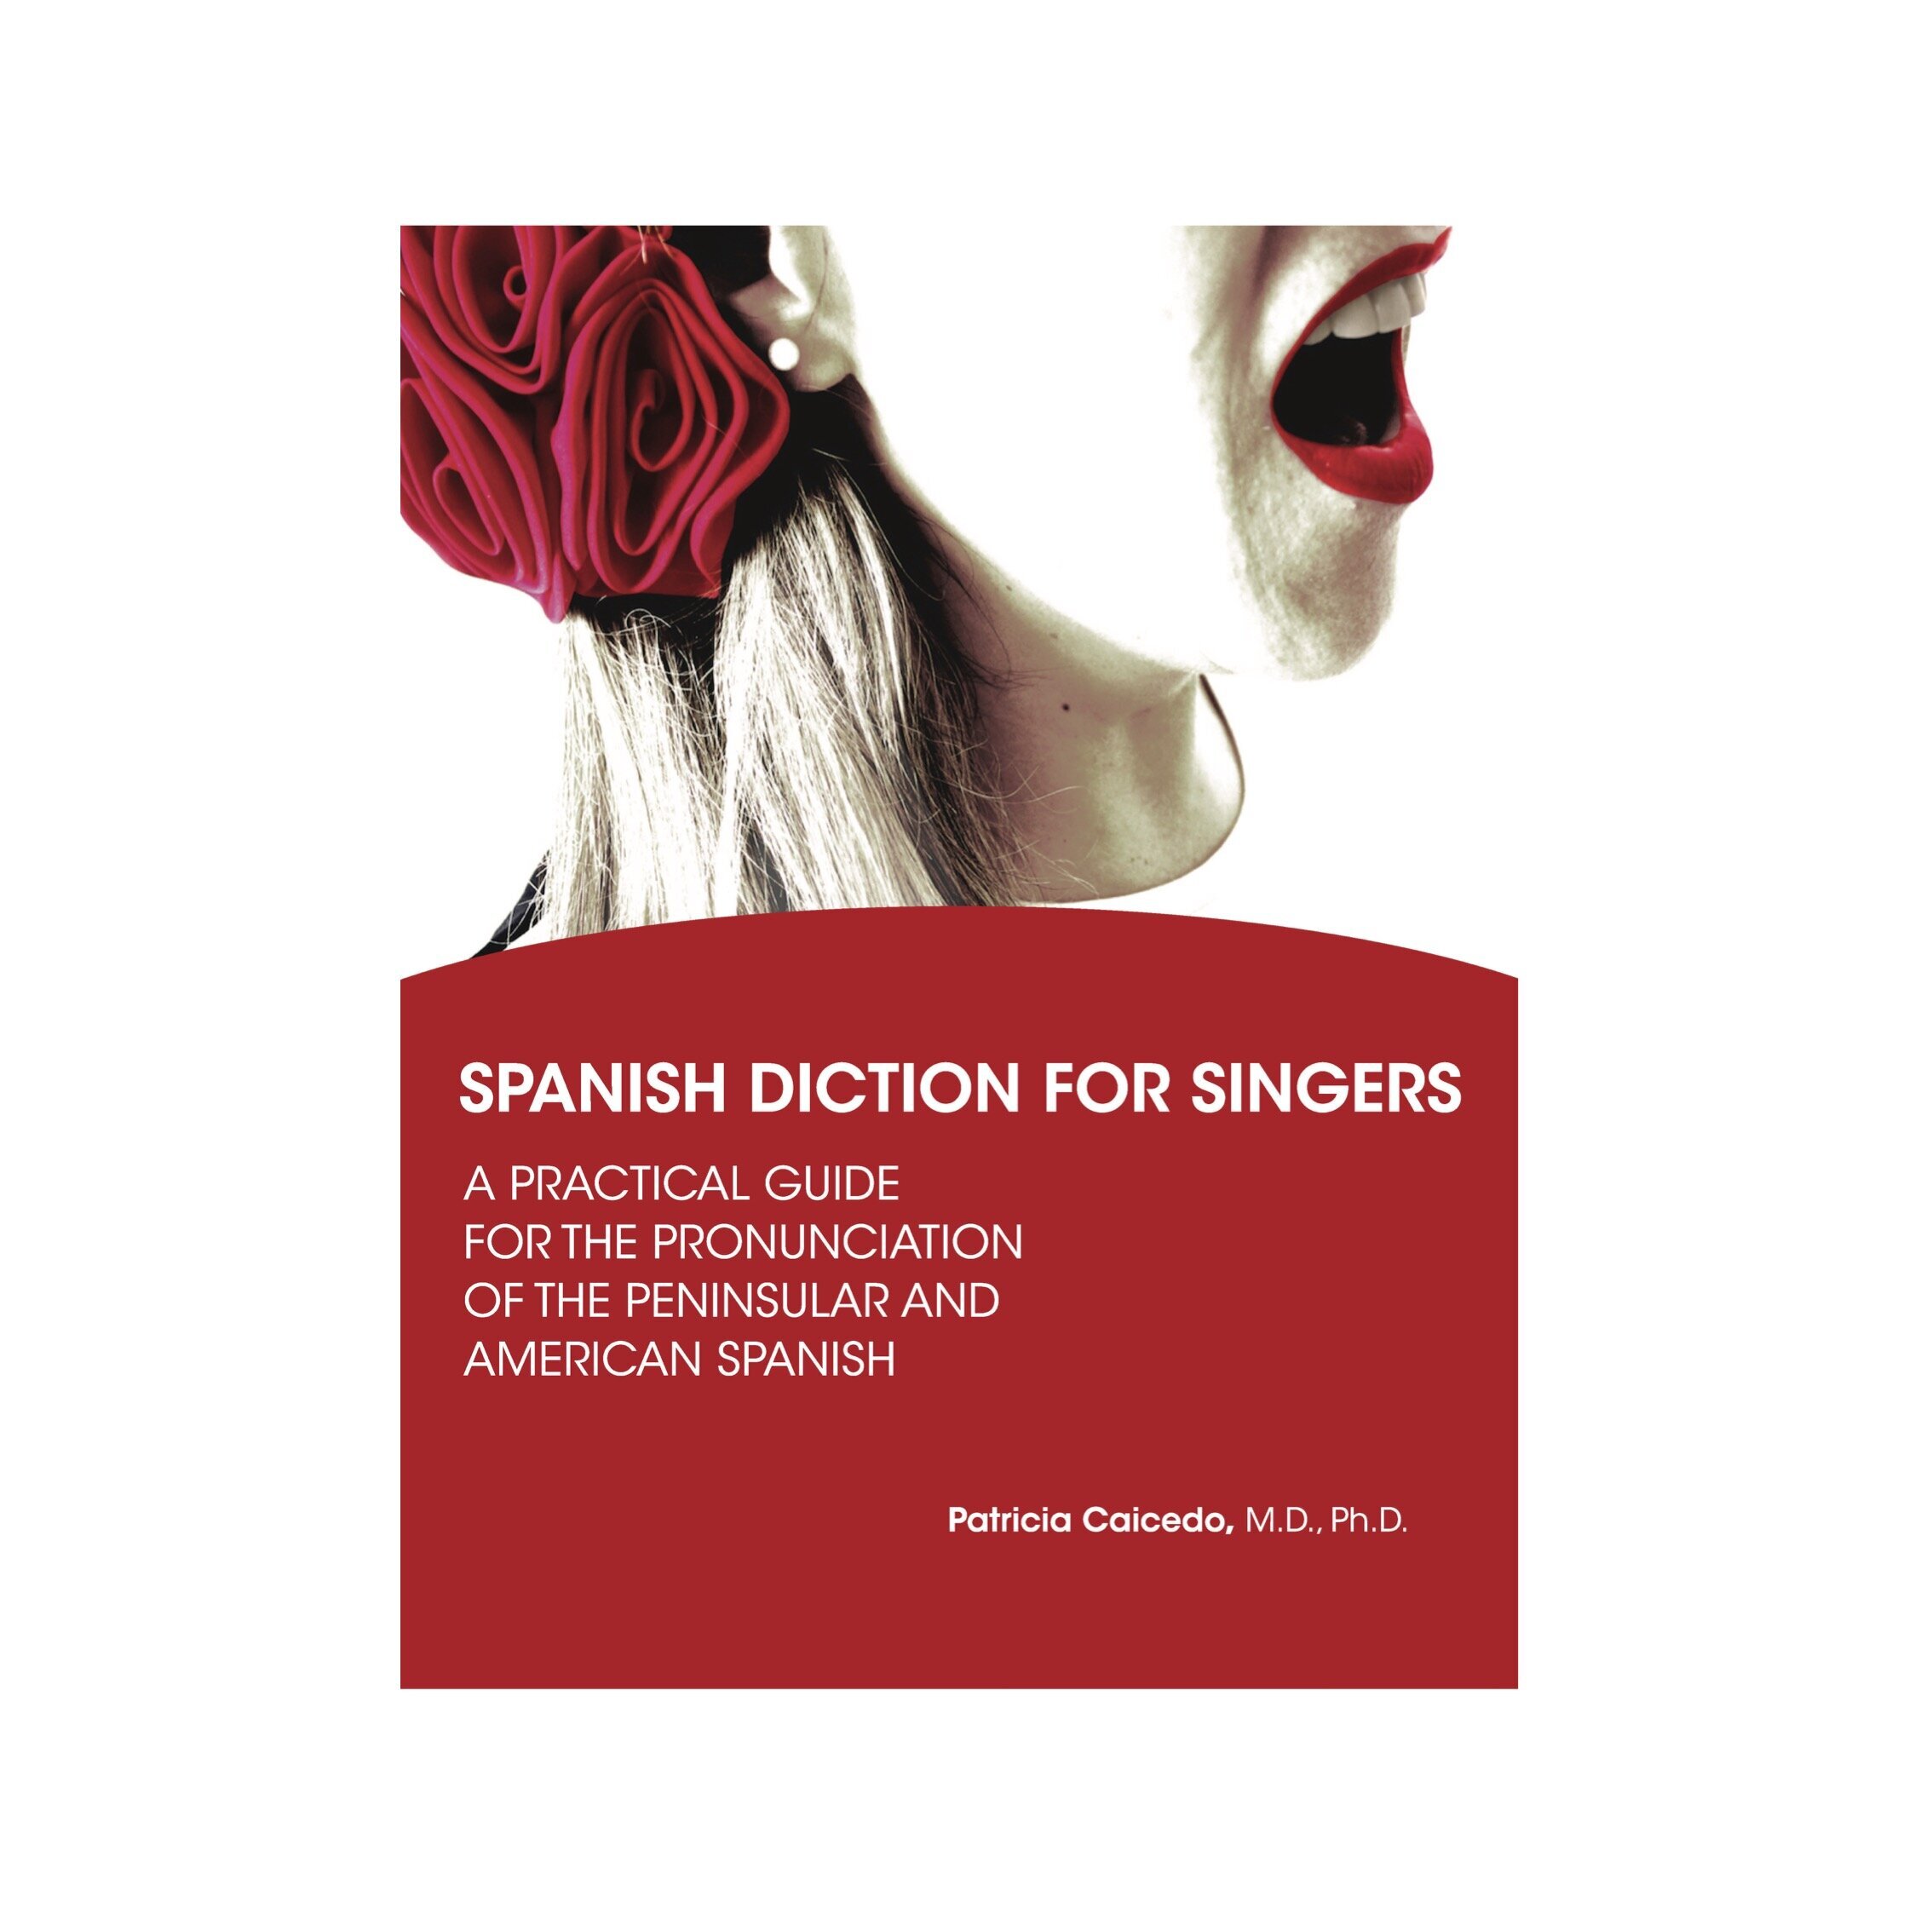 Spanish Diction for Singers  (Copy)